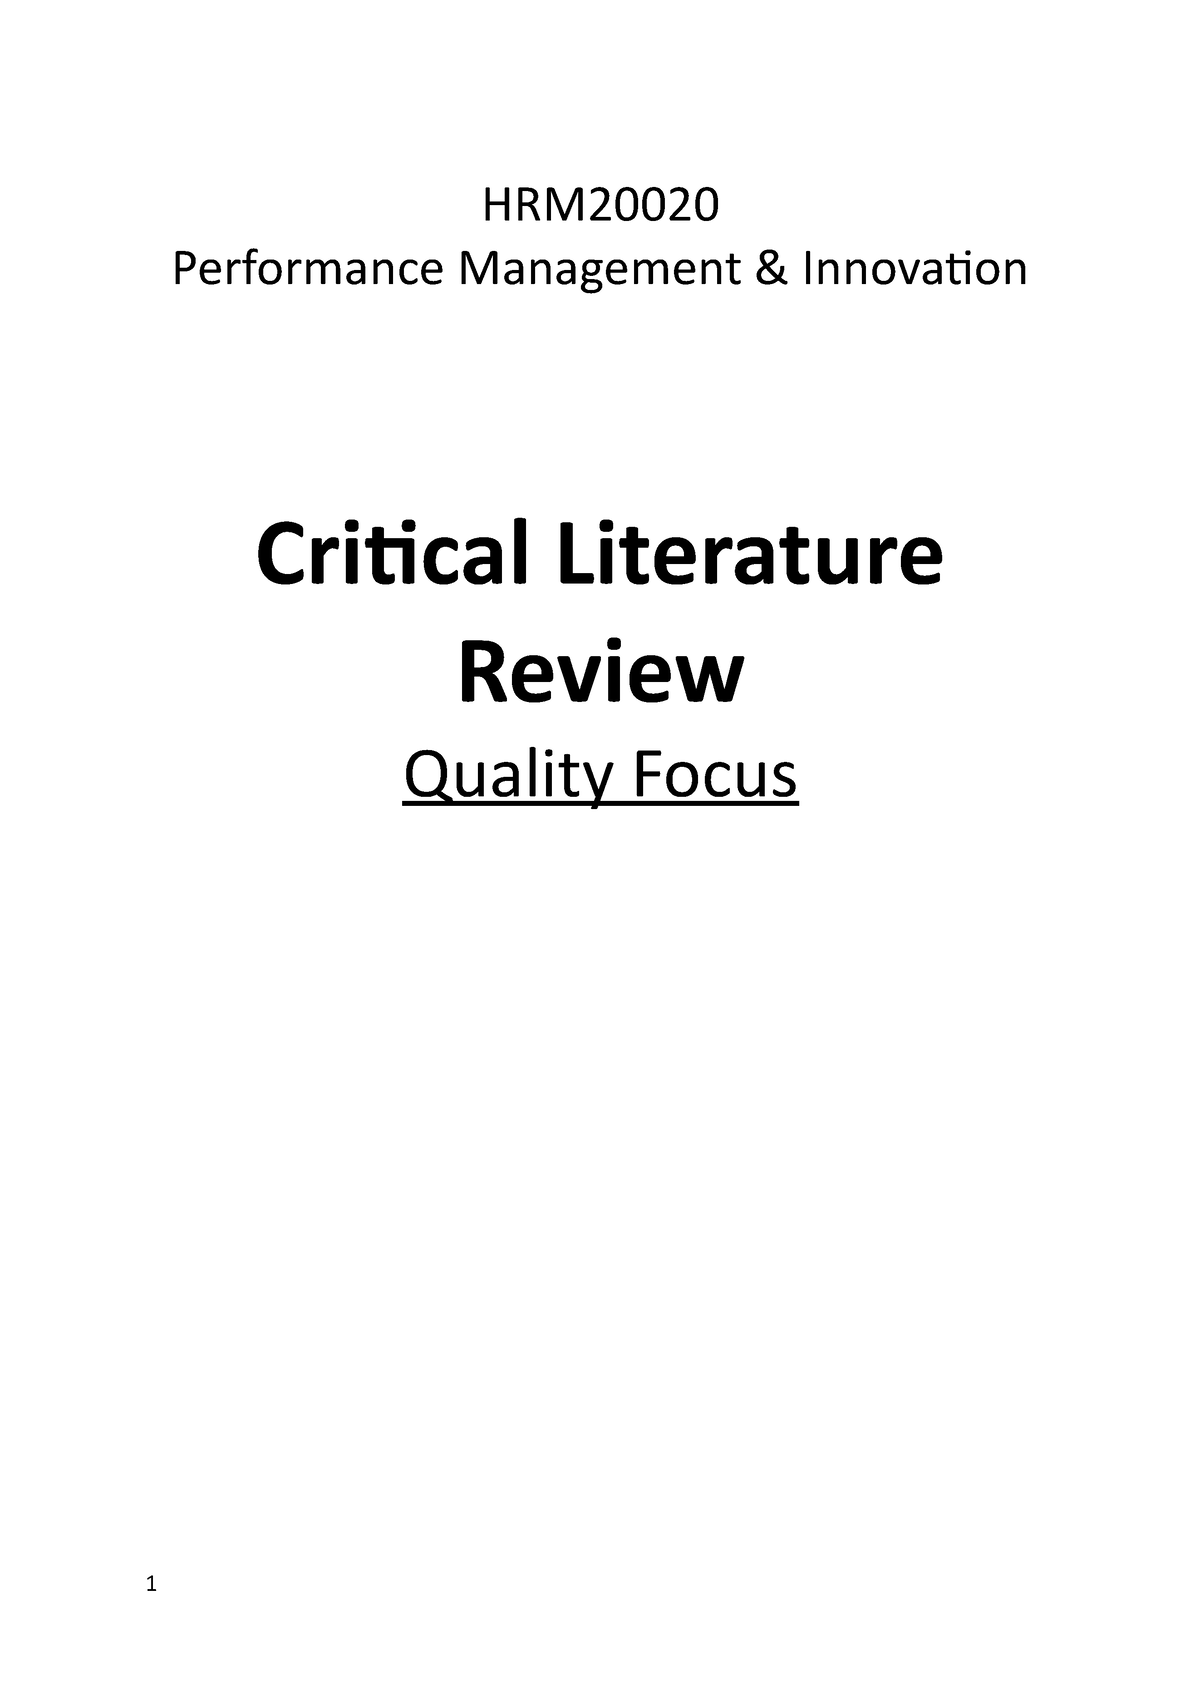 literature review of hr practices